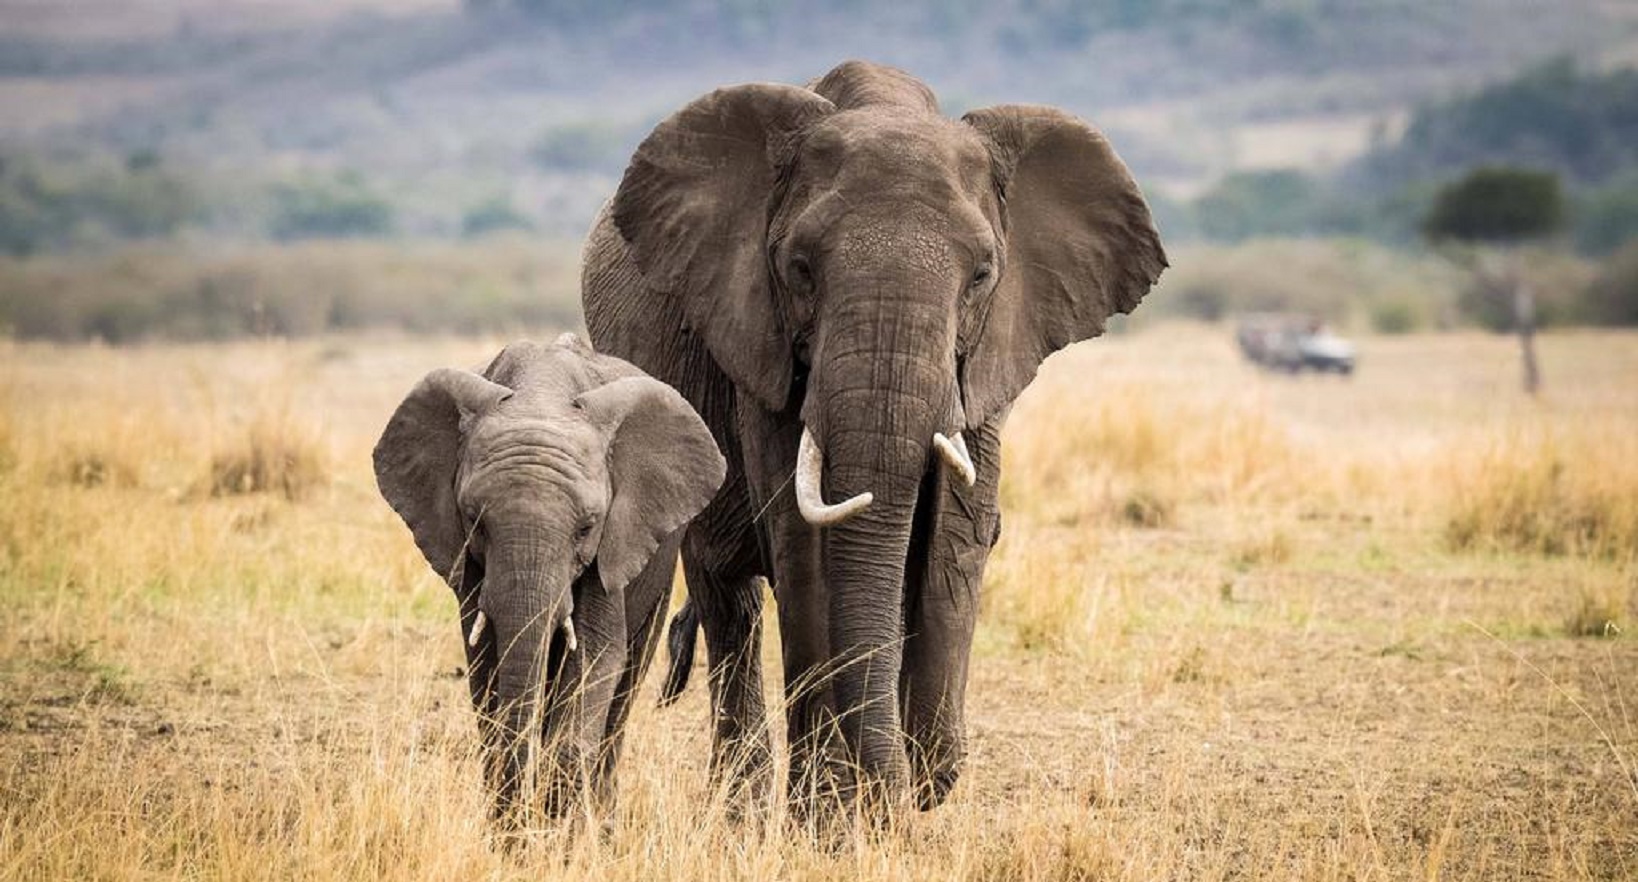 Kenya’s Elephant Population Has Doubled In The Last Three Decades